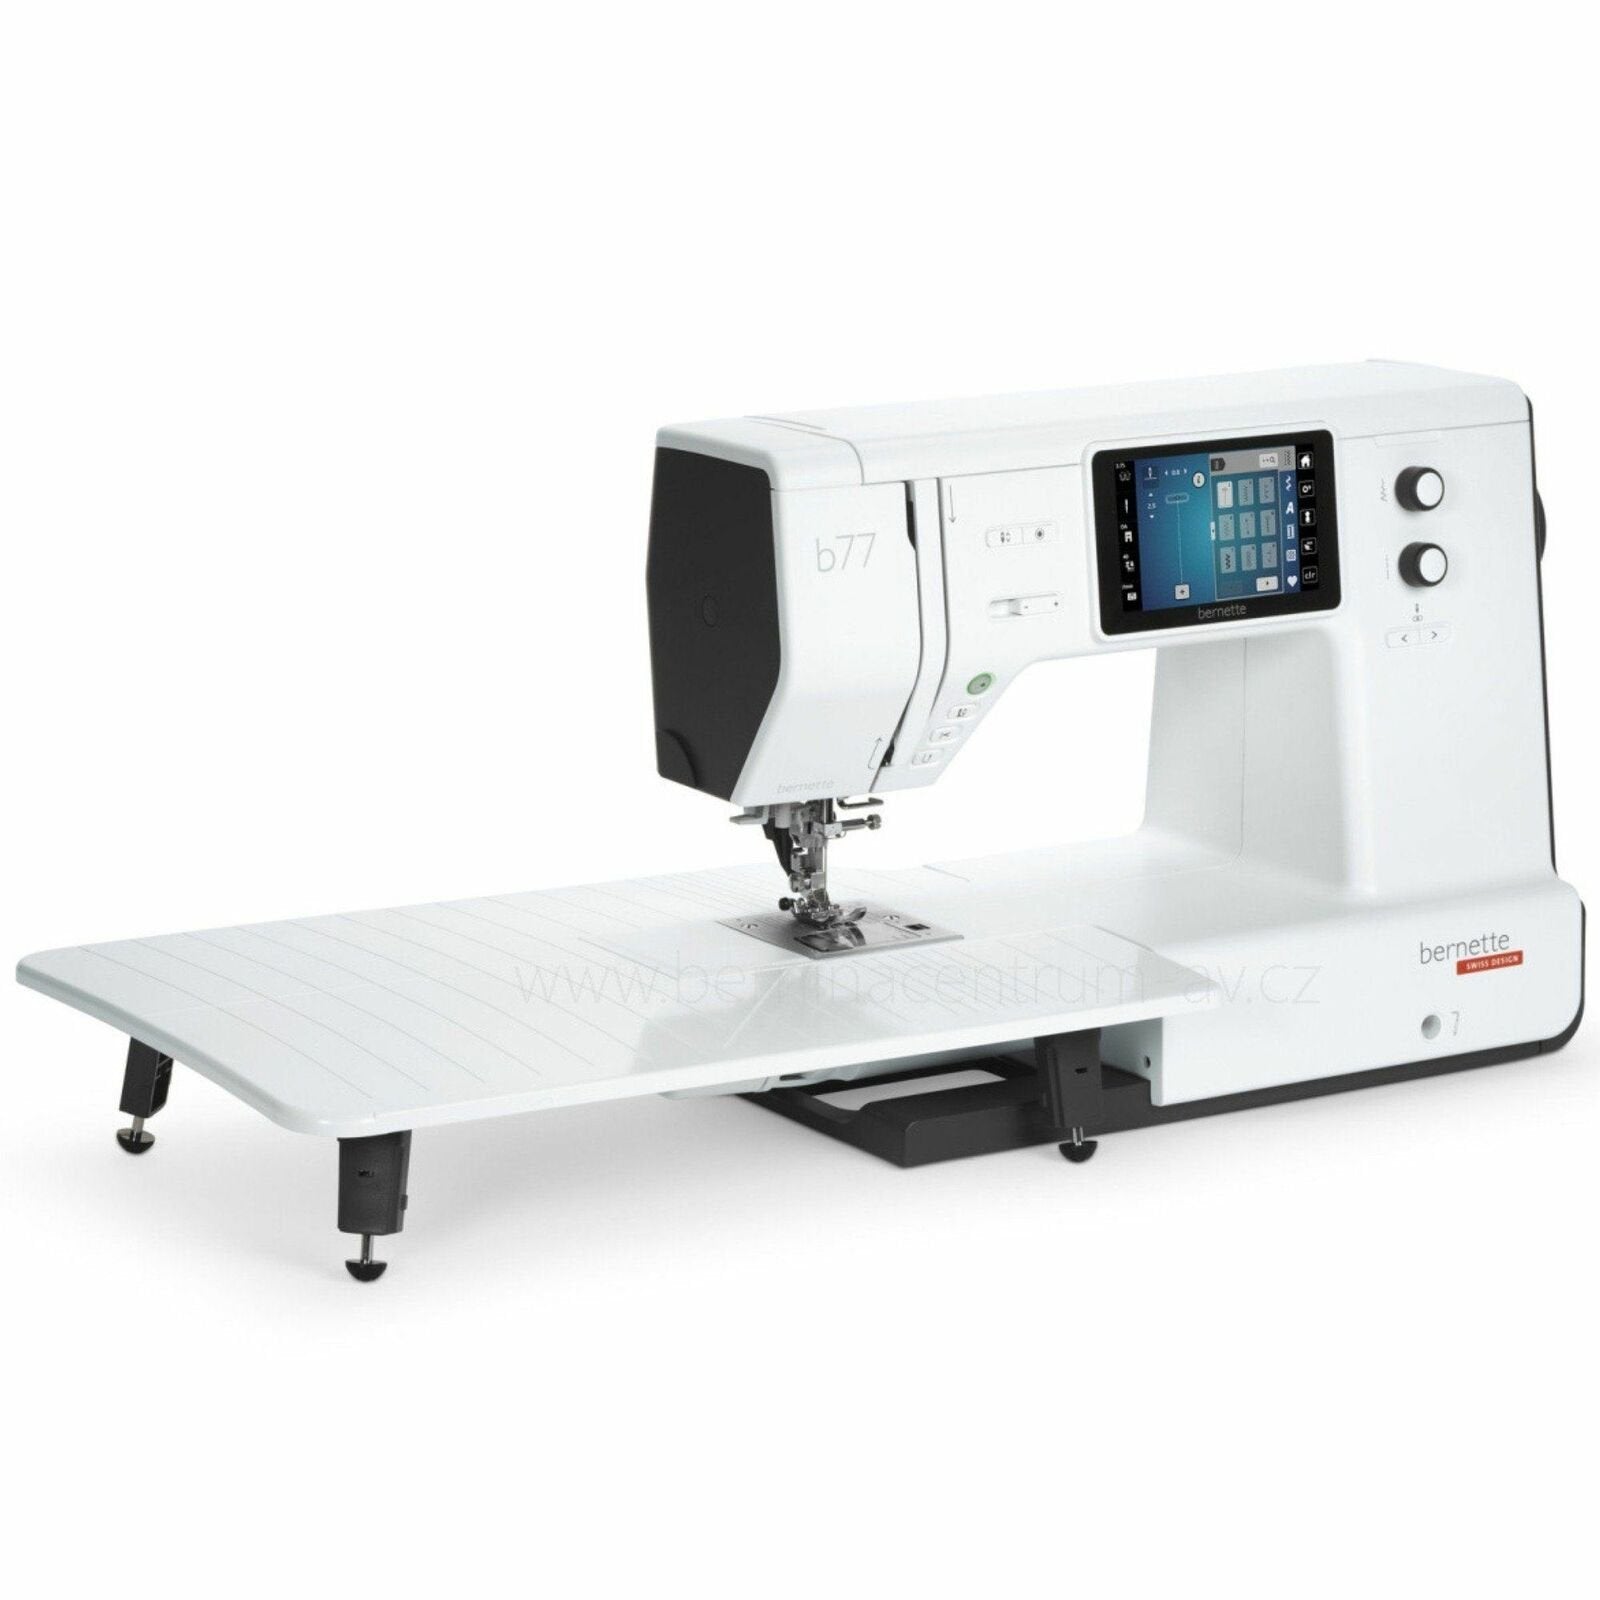 Bernette B77 Sewing and Quilting Machine table